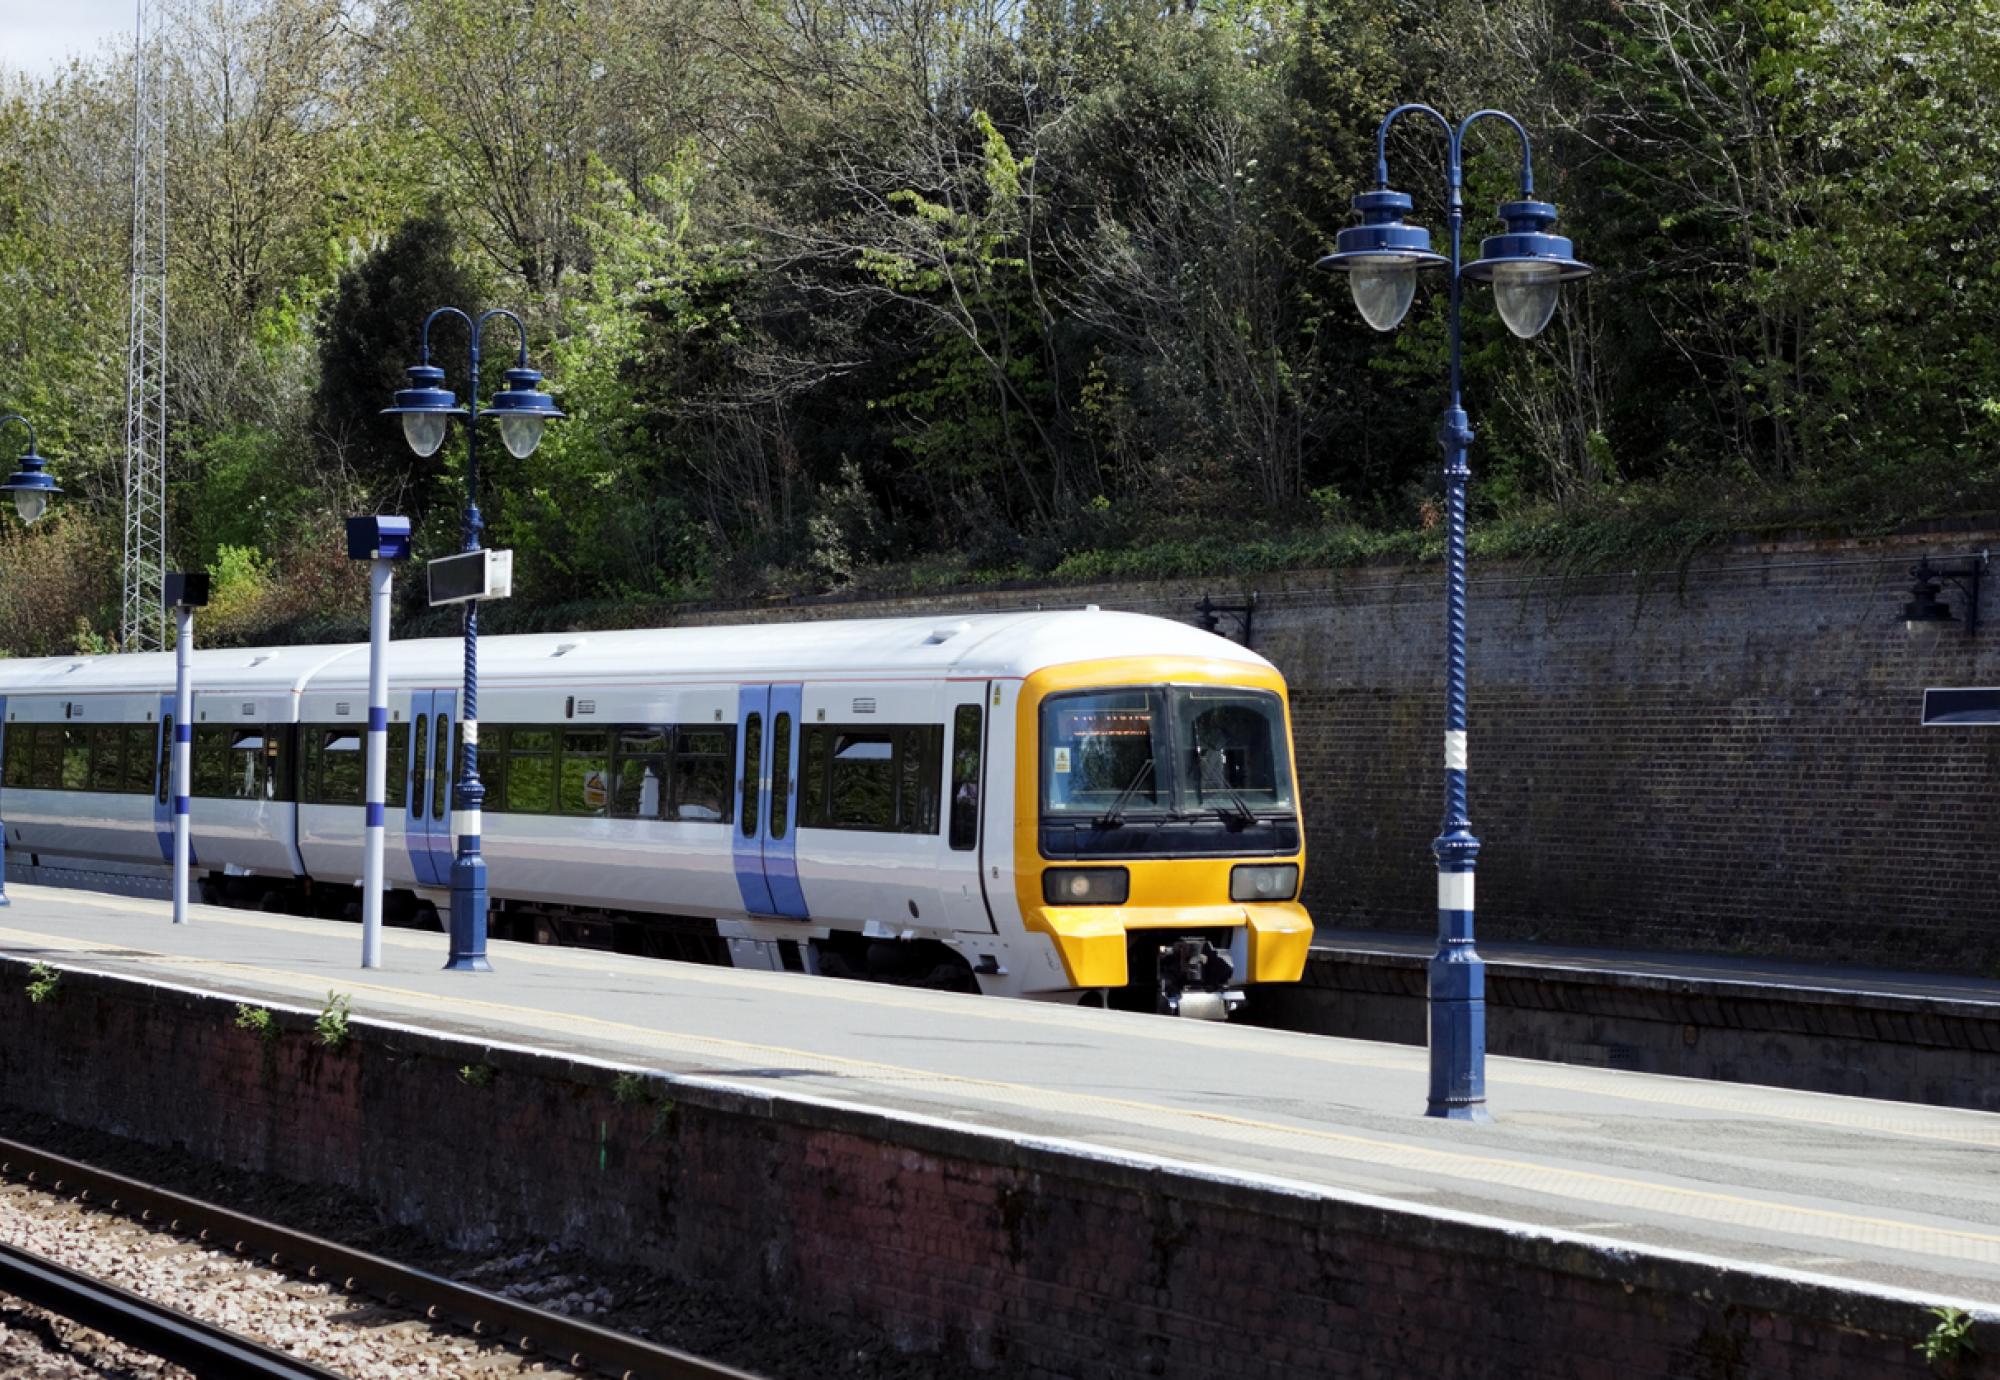 An electricity-powered passenger train entering a London suburban station on a bright and sunny April day.